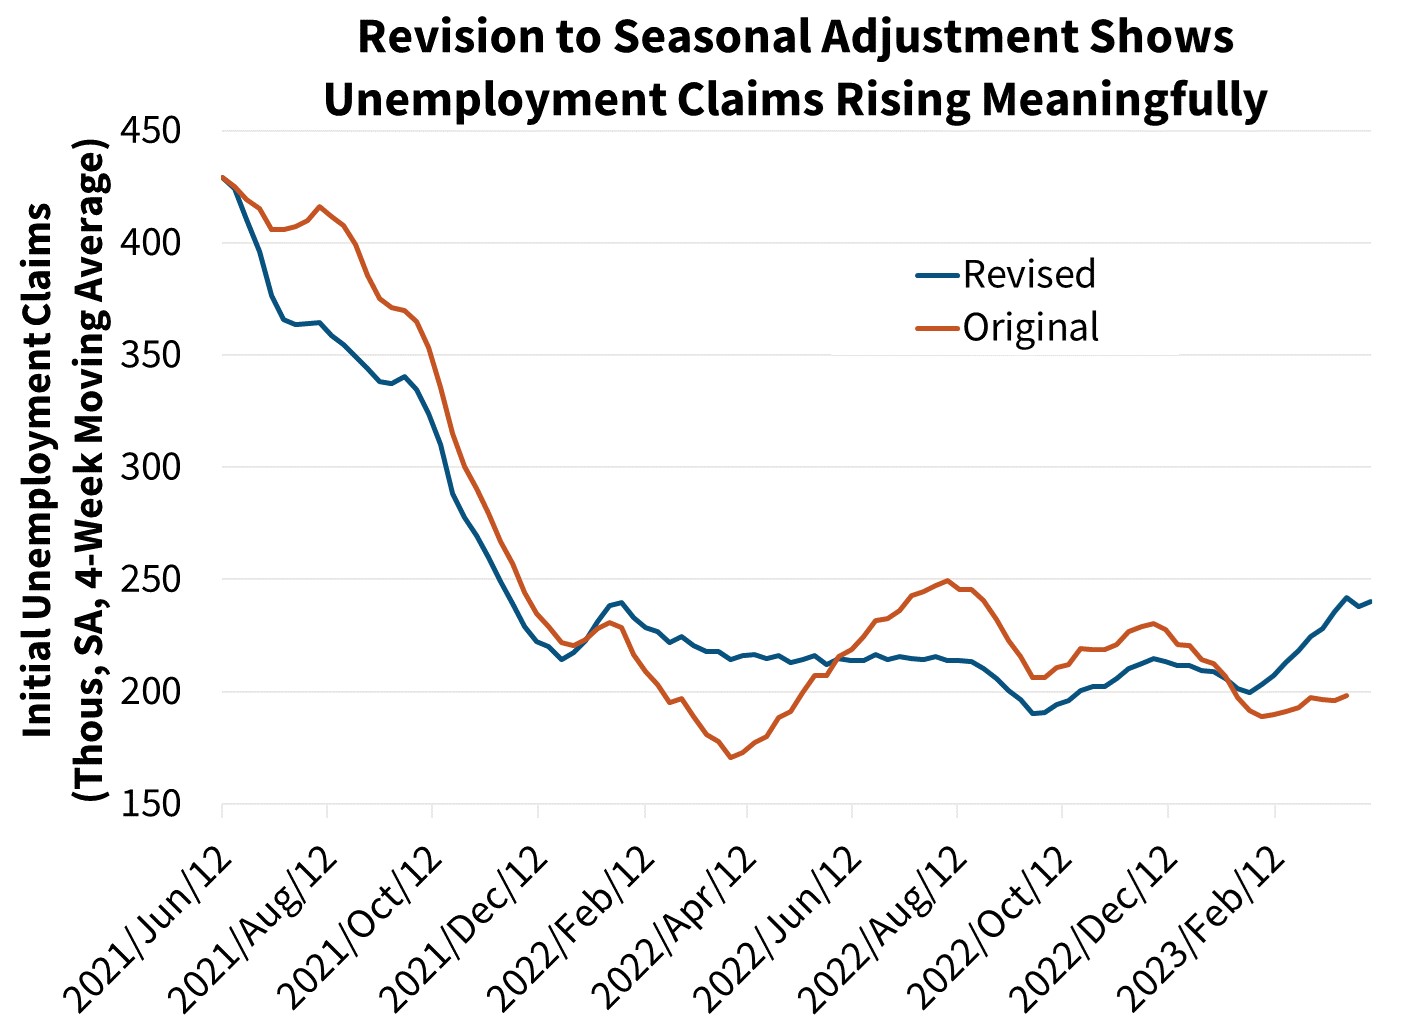  Revision to seasonal adjustment shows unemployment claims rising meaningfully
